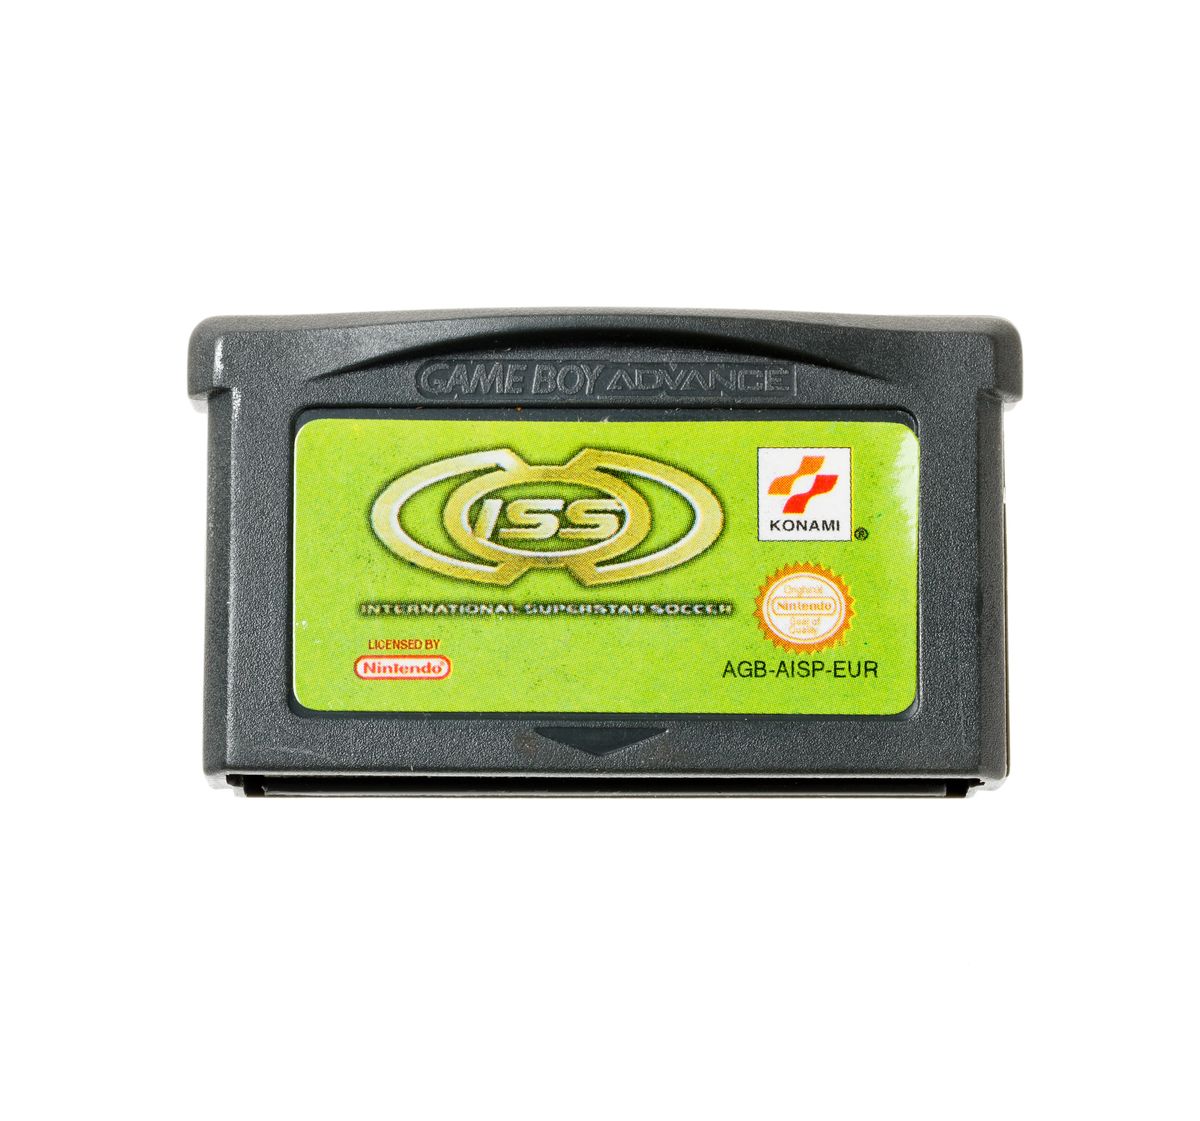 ISS - Gameboy Advance Games